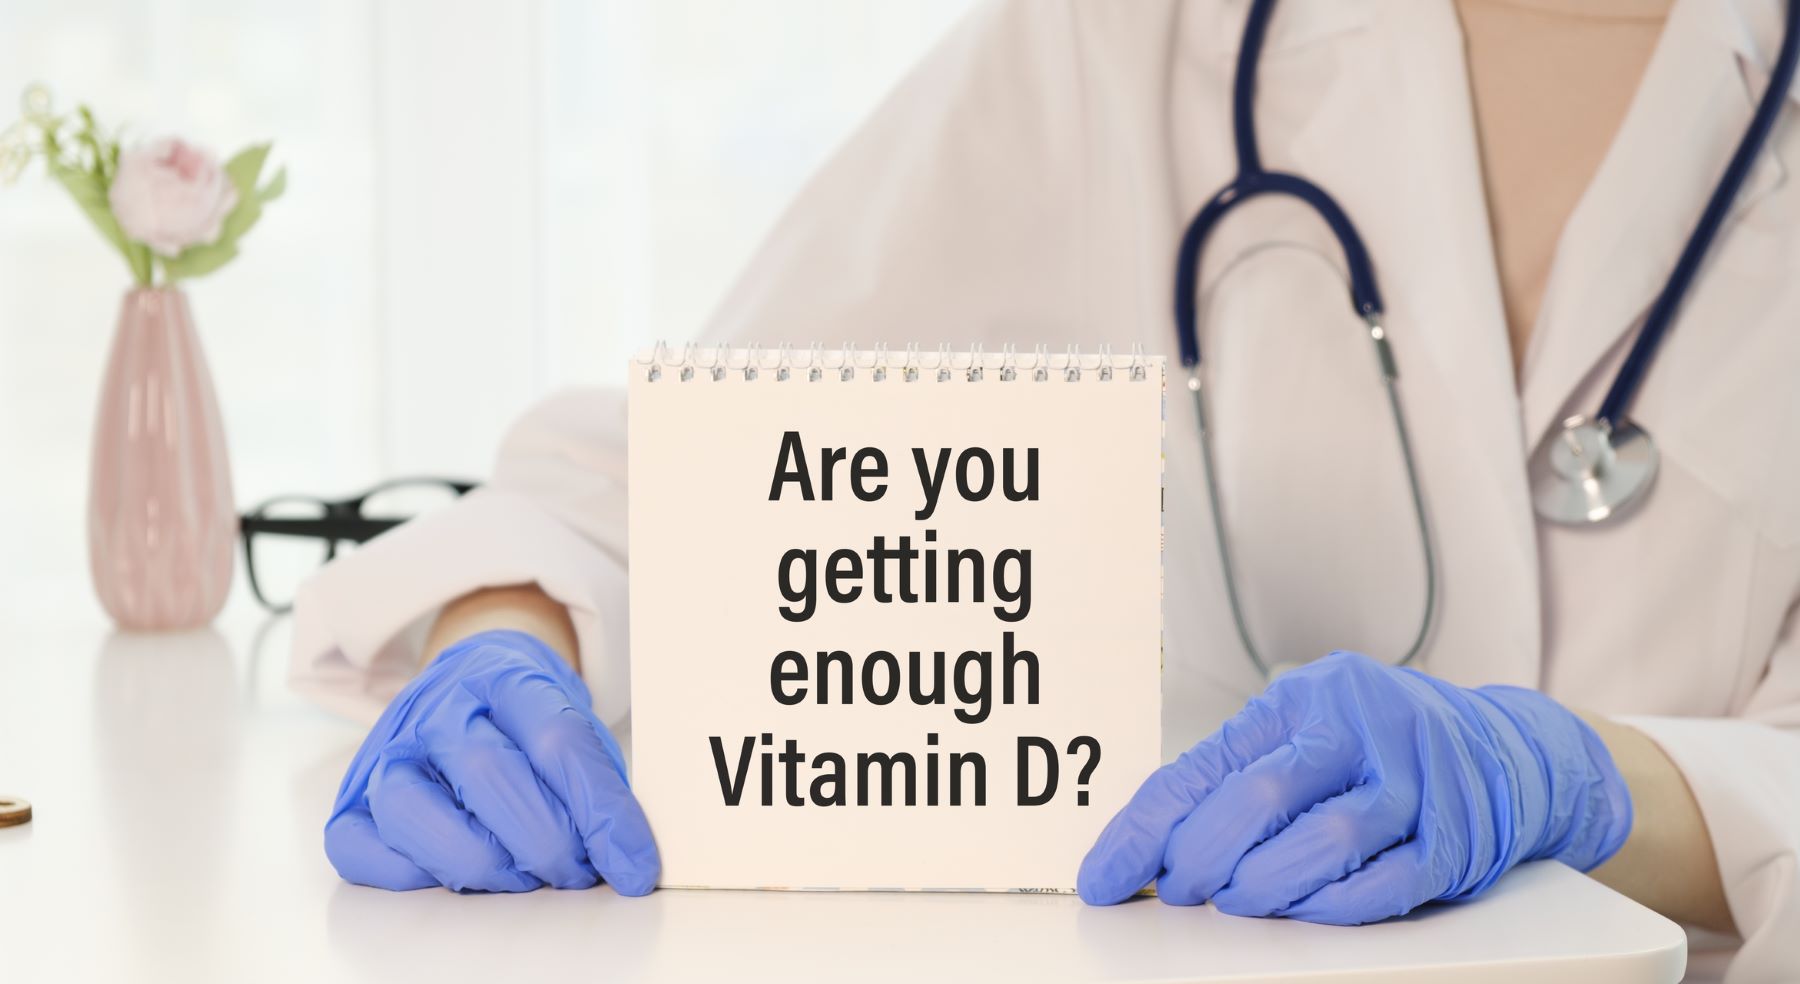 Who is at risk for vitamin D deficiency?